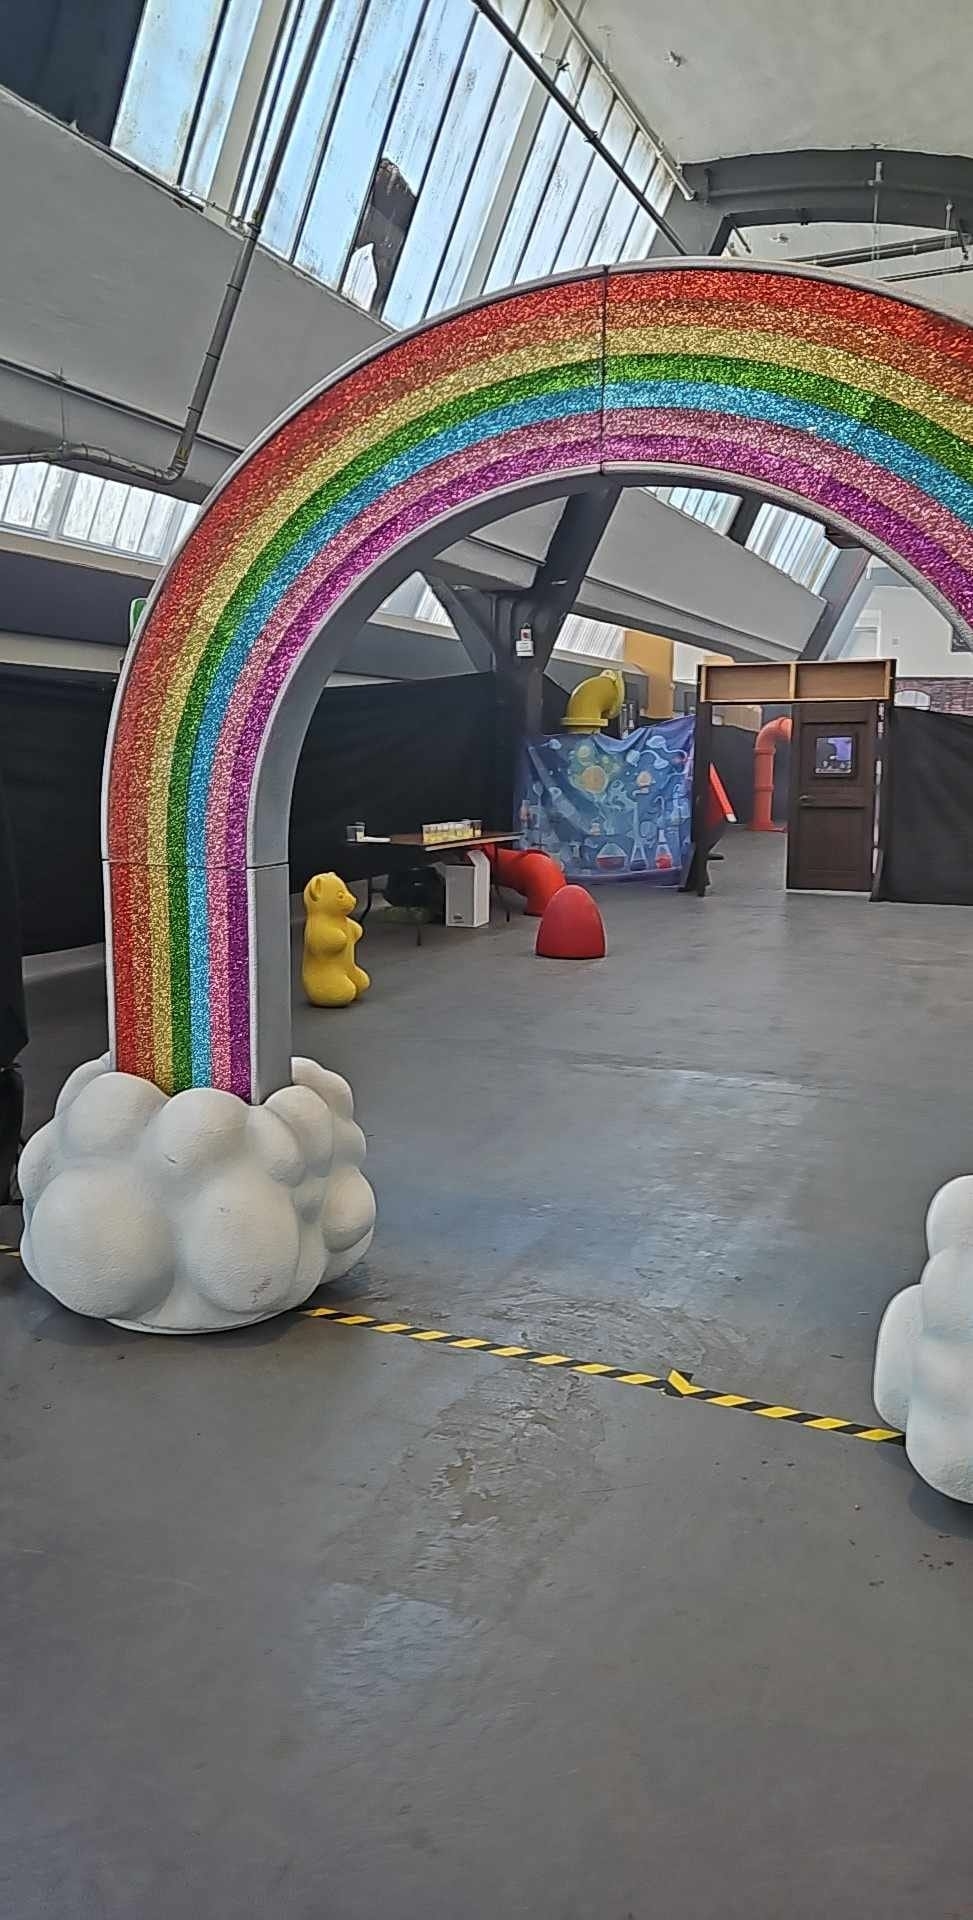 A rainbow arch installation in an indoor industrial space with a small yellow duck sculpture